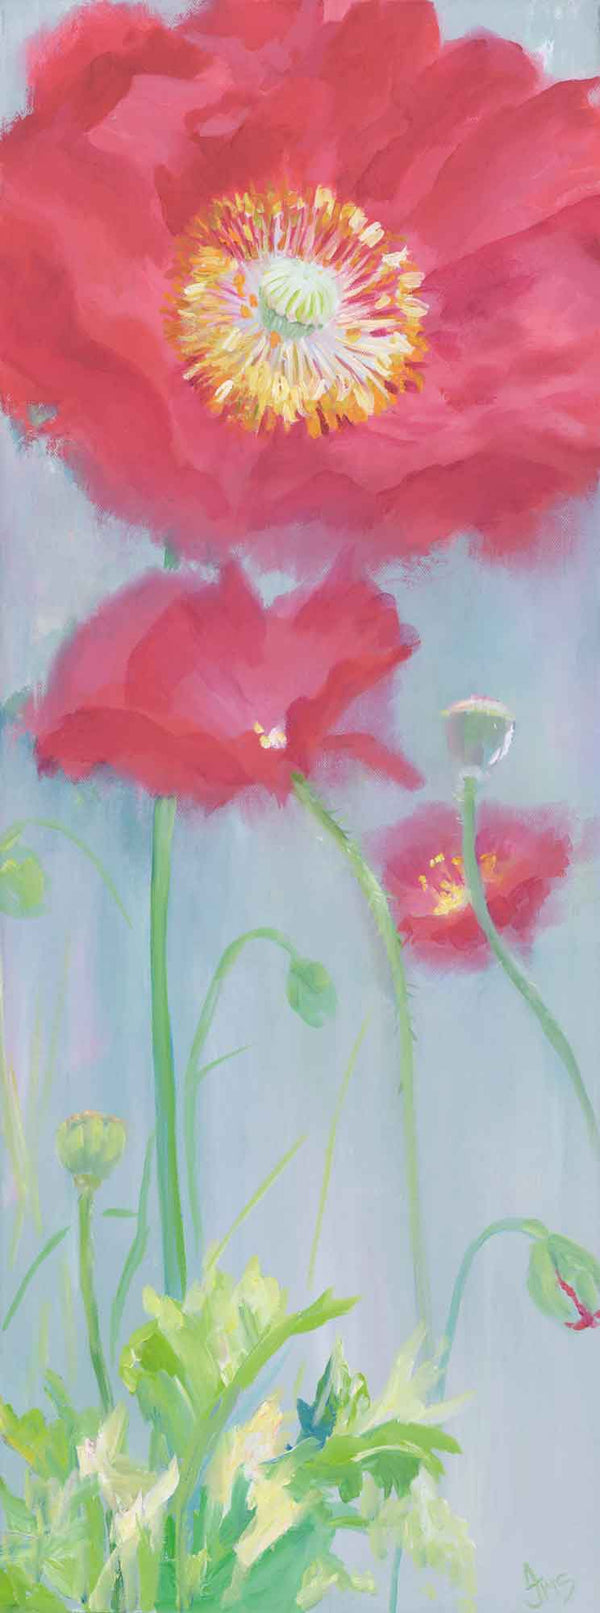 Print-IC277P - Poppies in the Fields Large-Whistlefish